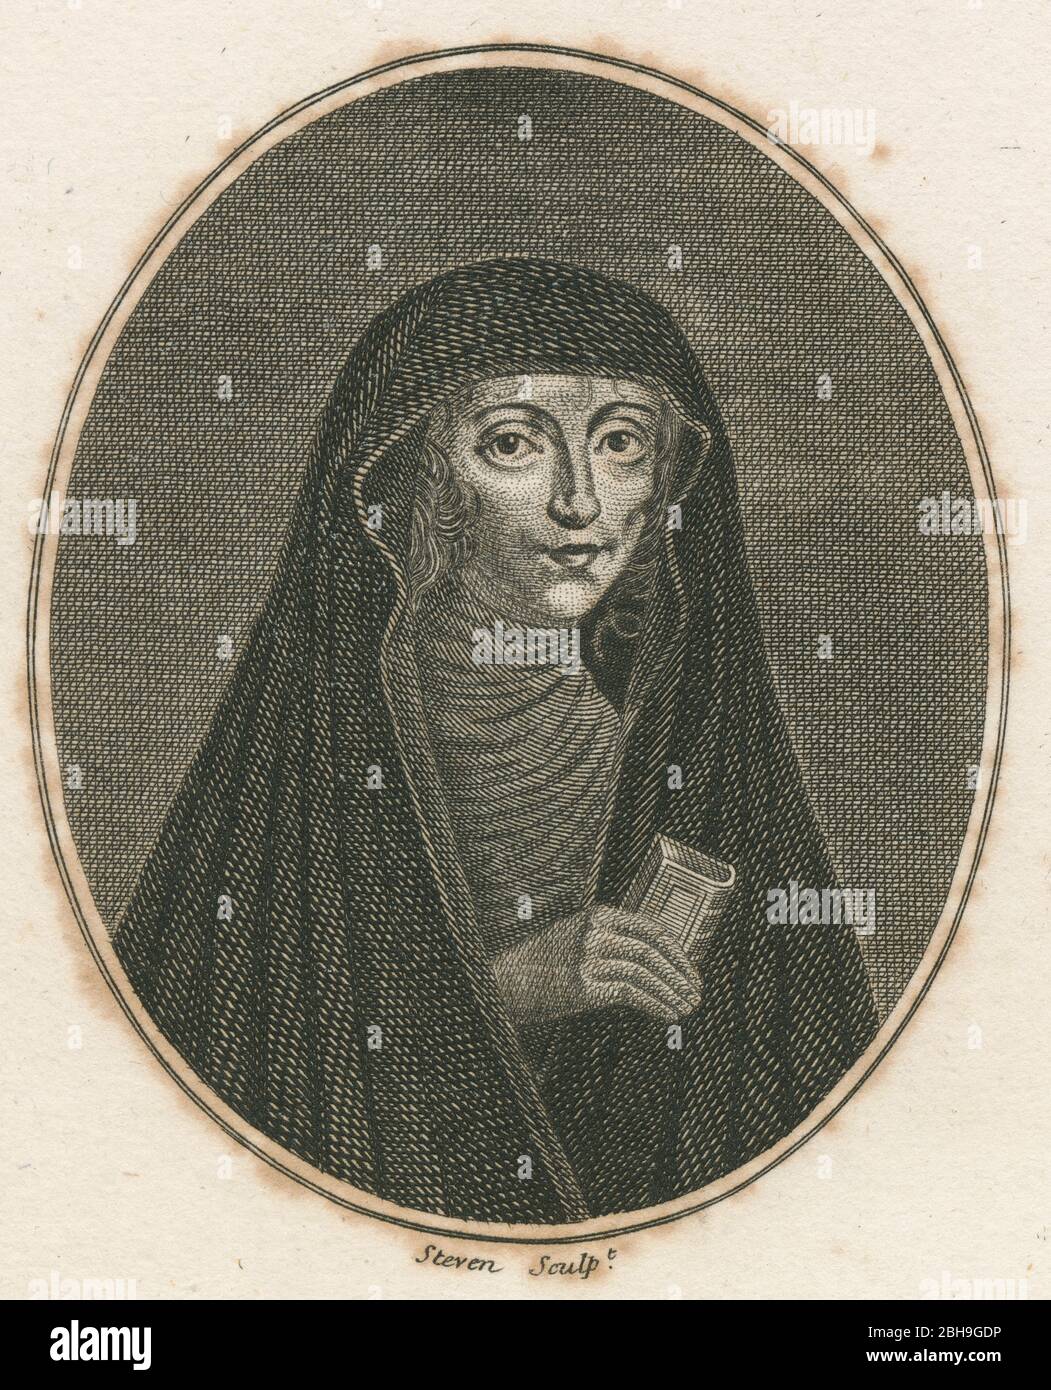 Antique 1804 engraving, Lettice Cary (née Morison), Viscountess Falkland. Lettice Cary (c1612-1646), Noblewoman, benefactor, and wife of 2nd Viscount Falkland. SOURCE: ORIGINAL ENGRAVING Stock Photo